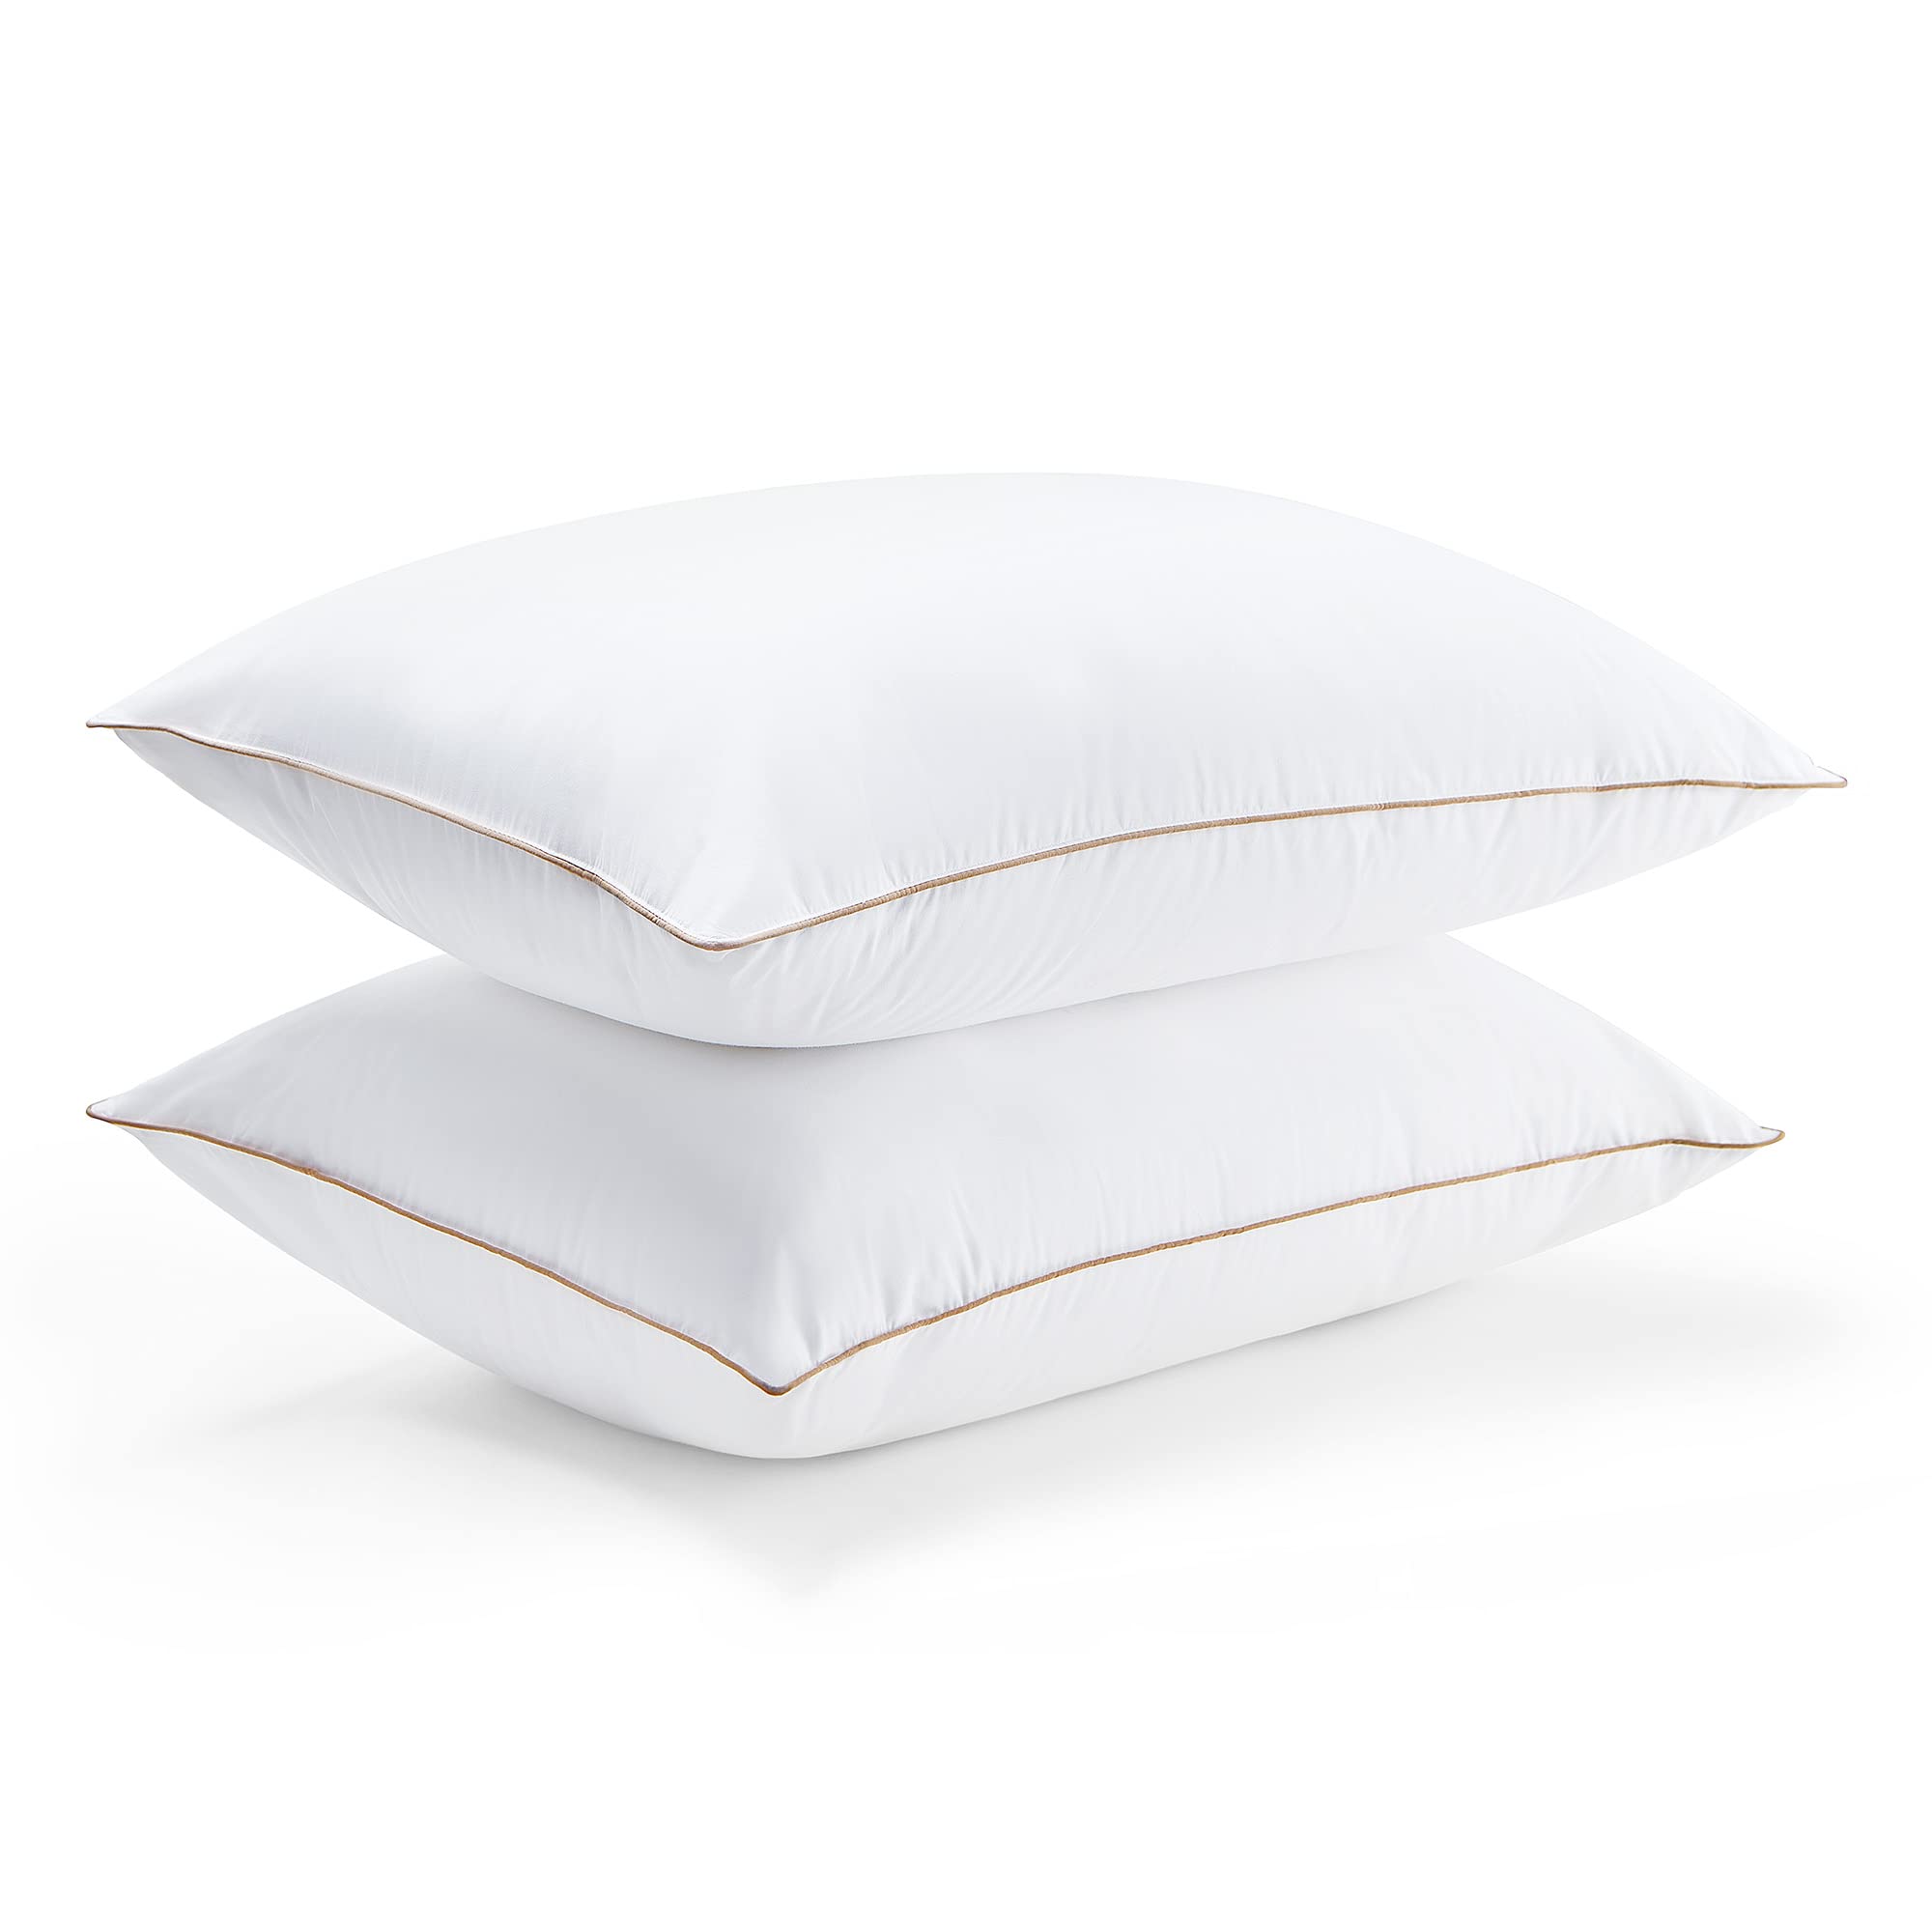 puredown® Goose Feathers and Down Alternative Pillows, Premium Medium to Firm Bed Pillows for Sleeping, Luxury Pillows with Down